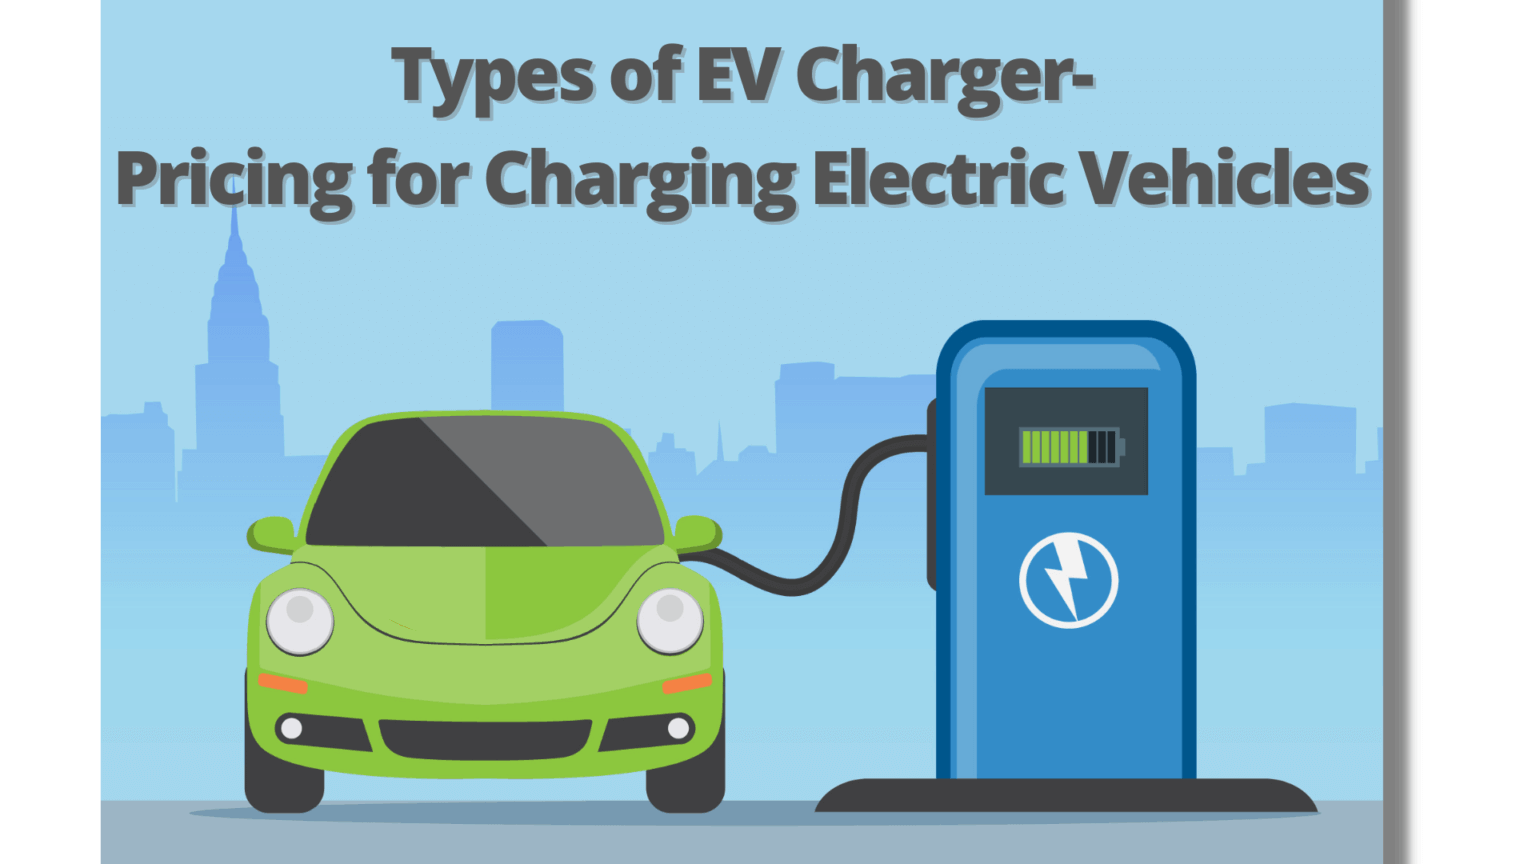 Types of EV Charger- Pricing for Charging Electric Vehicles - E-Vehicleinfo